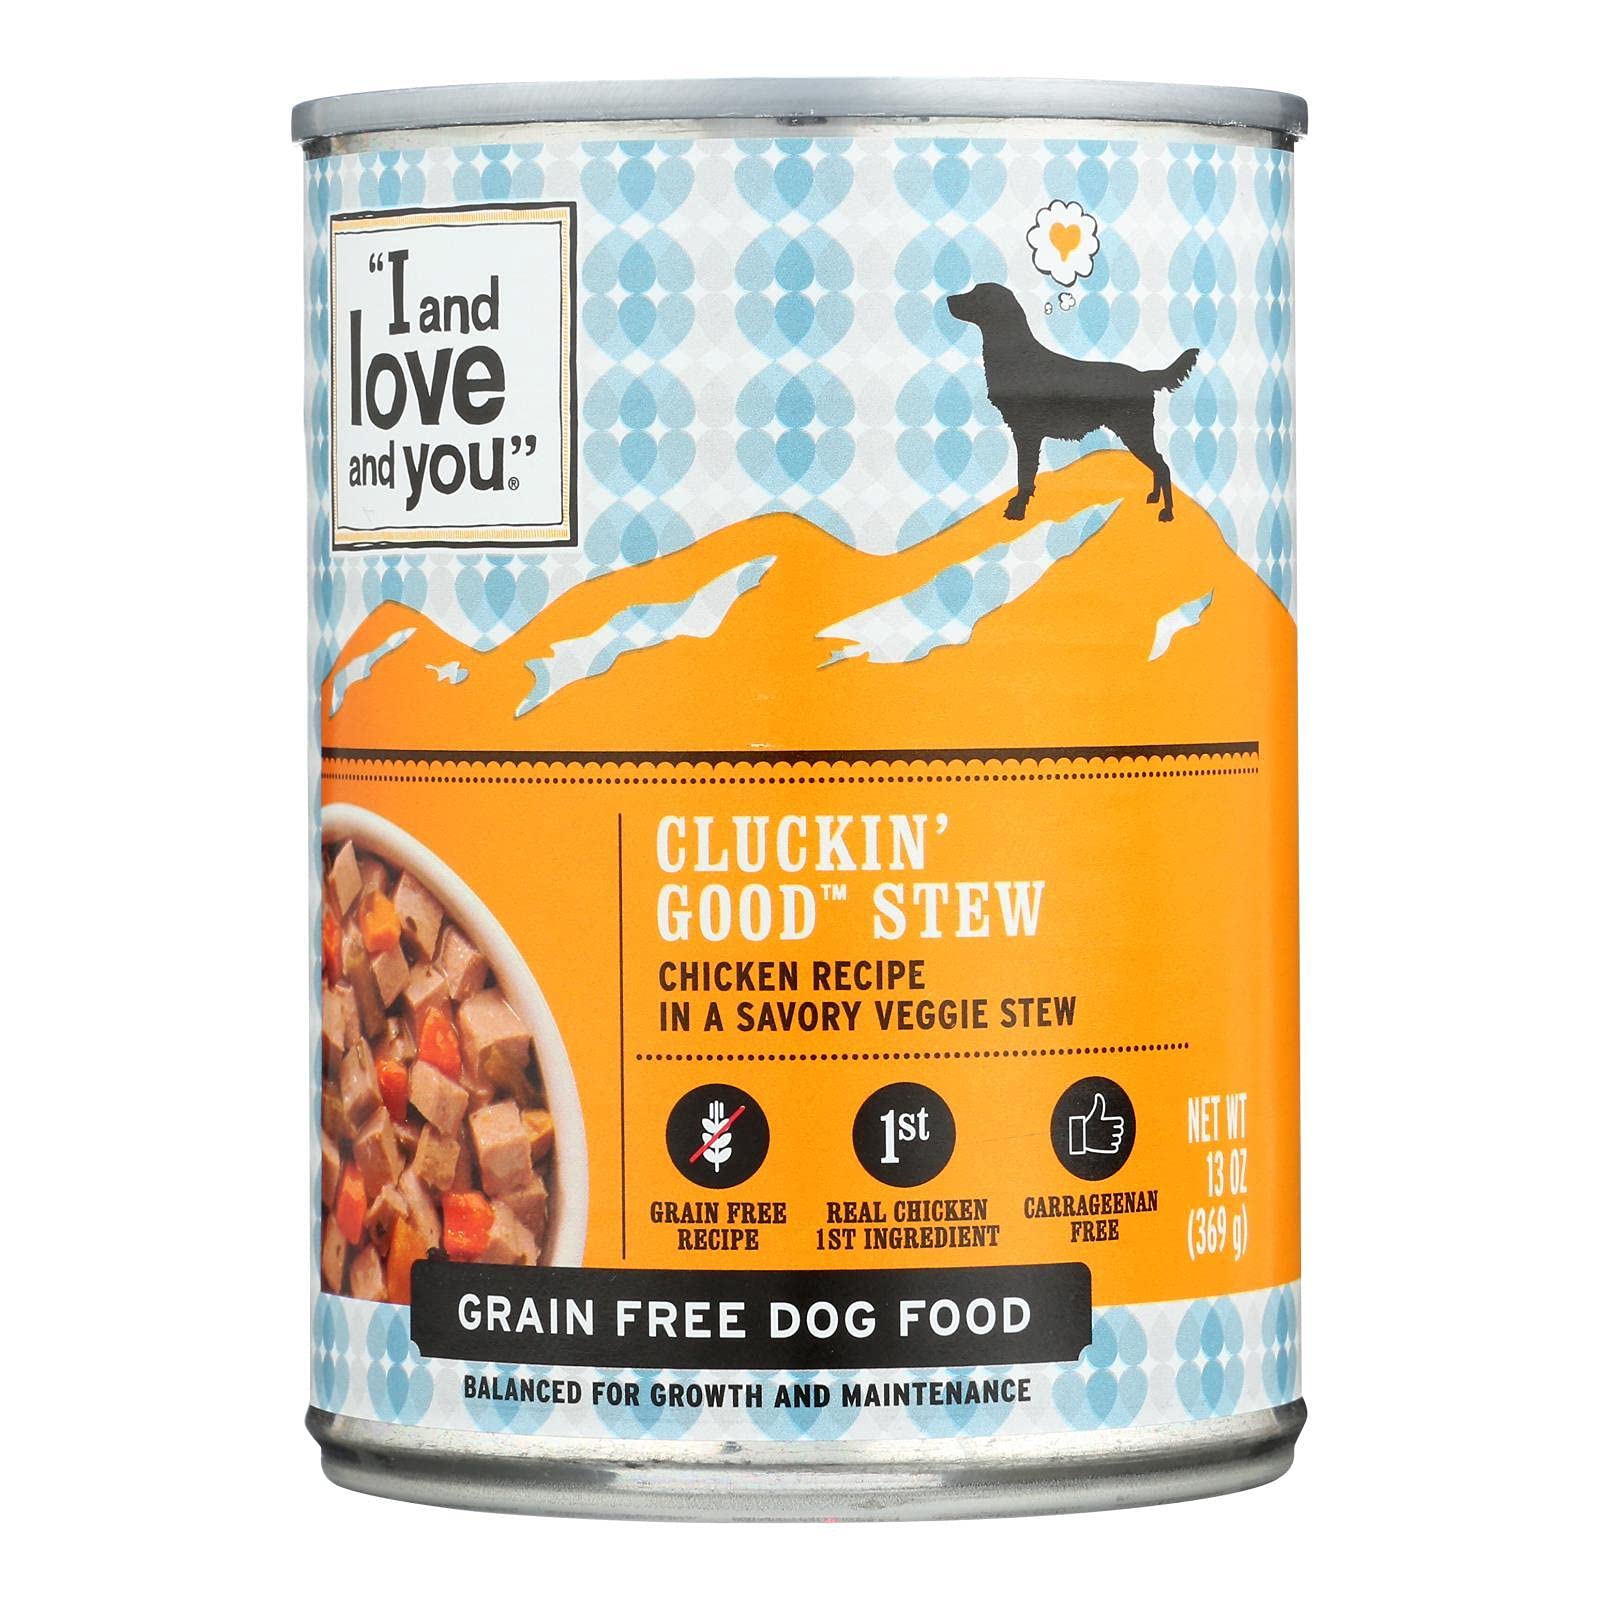 I and love and you DOg FOOD,cAN,cLUcKIN STE